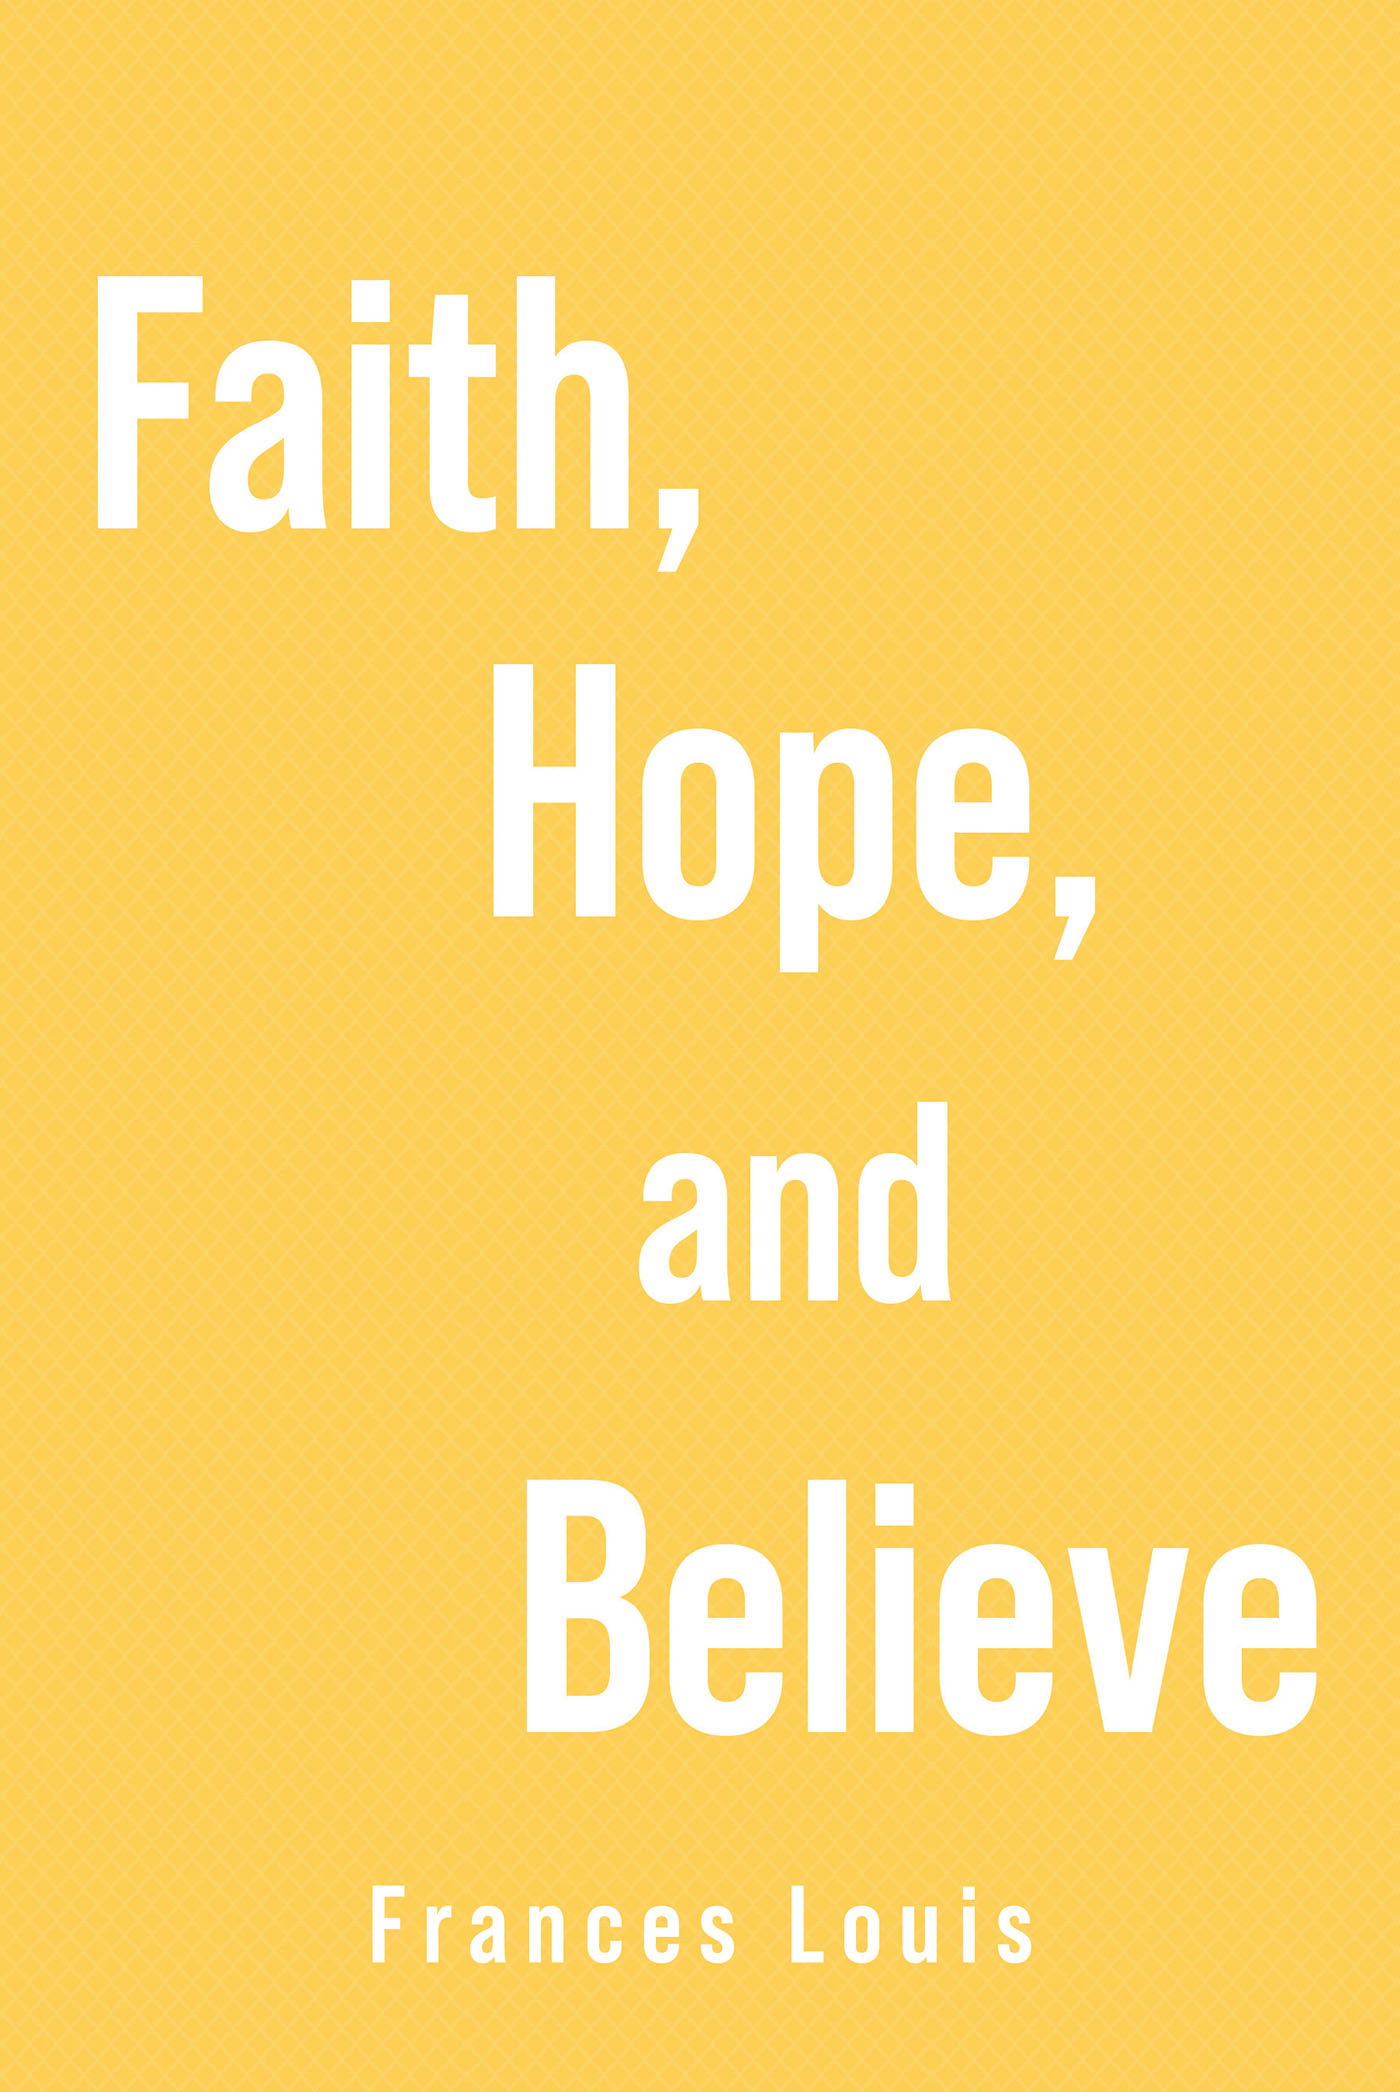 Frances Louis’s Newly Released "Faith, Hope and Believe" is a Moving Discussion of the Importance of Trusting and Believing in God